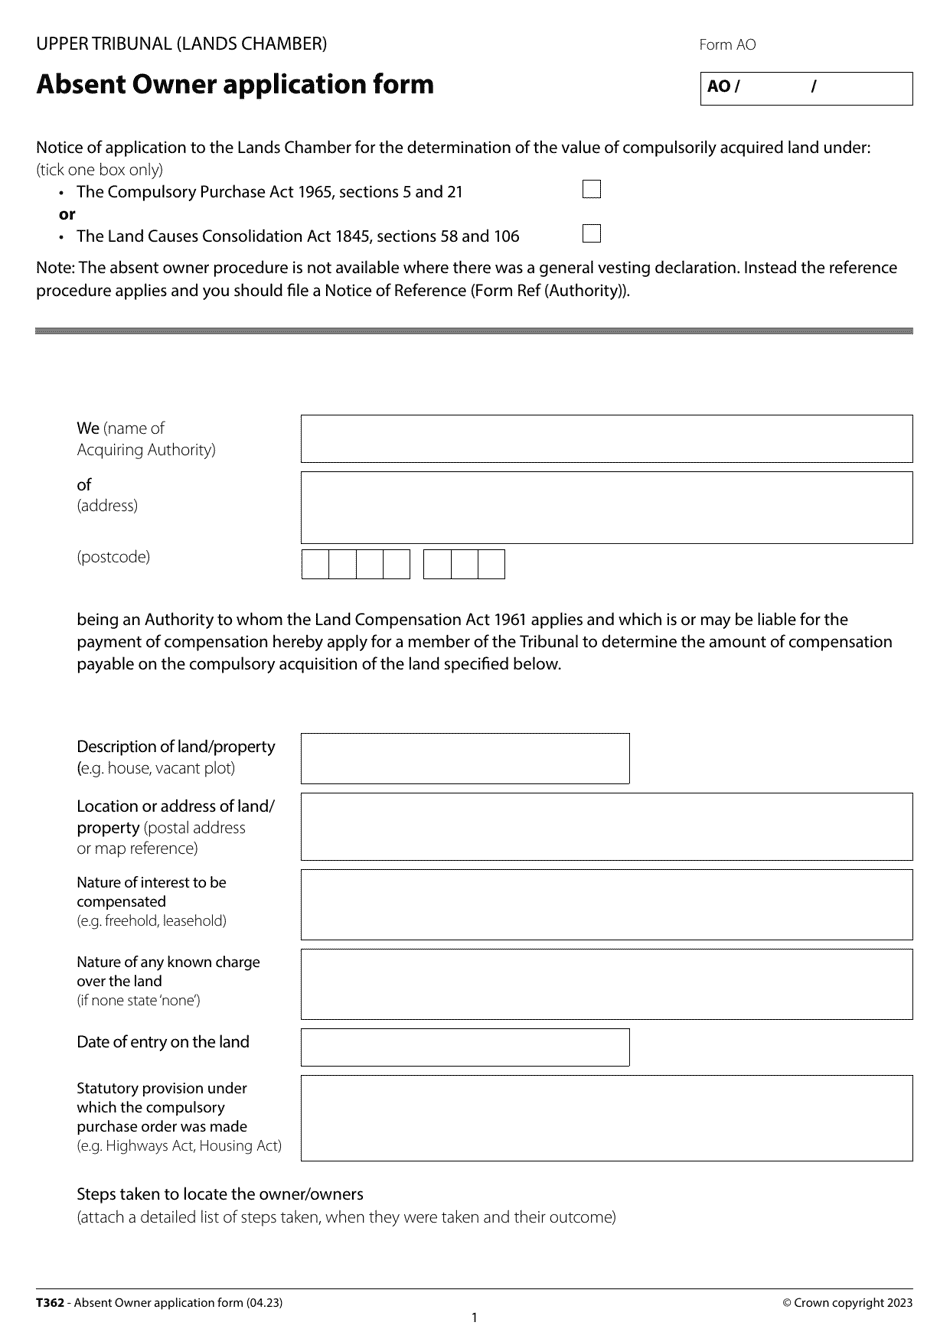 Form T362 Absent Owner Application Form - United Kingdom, Page 1